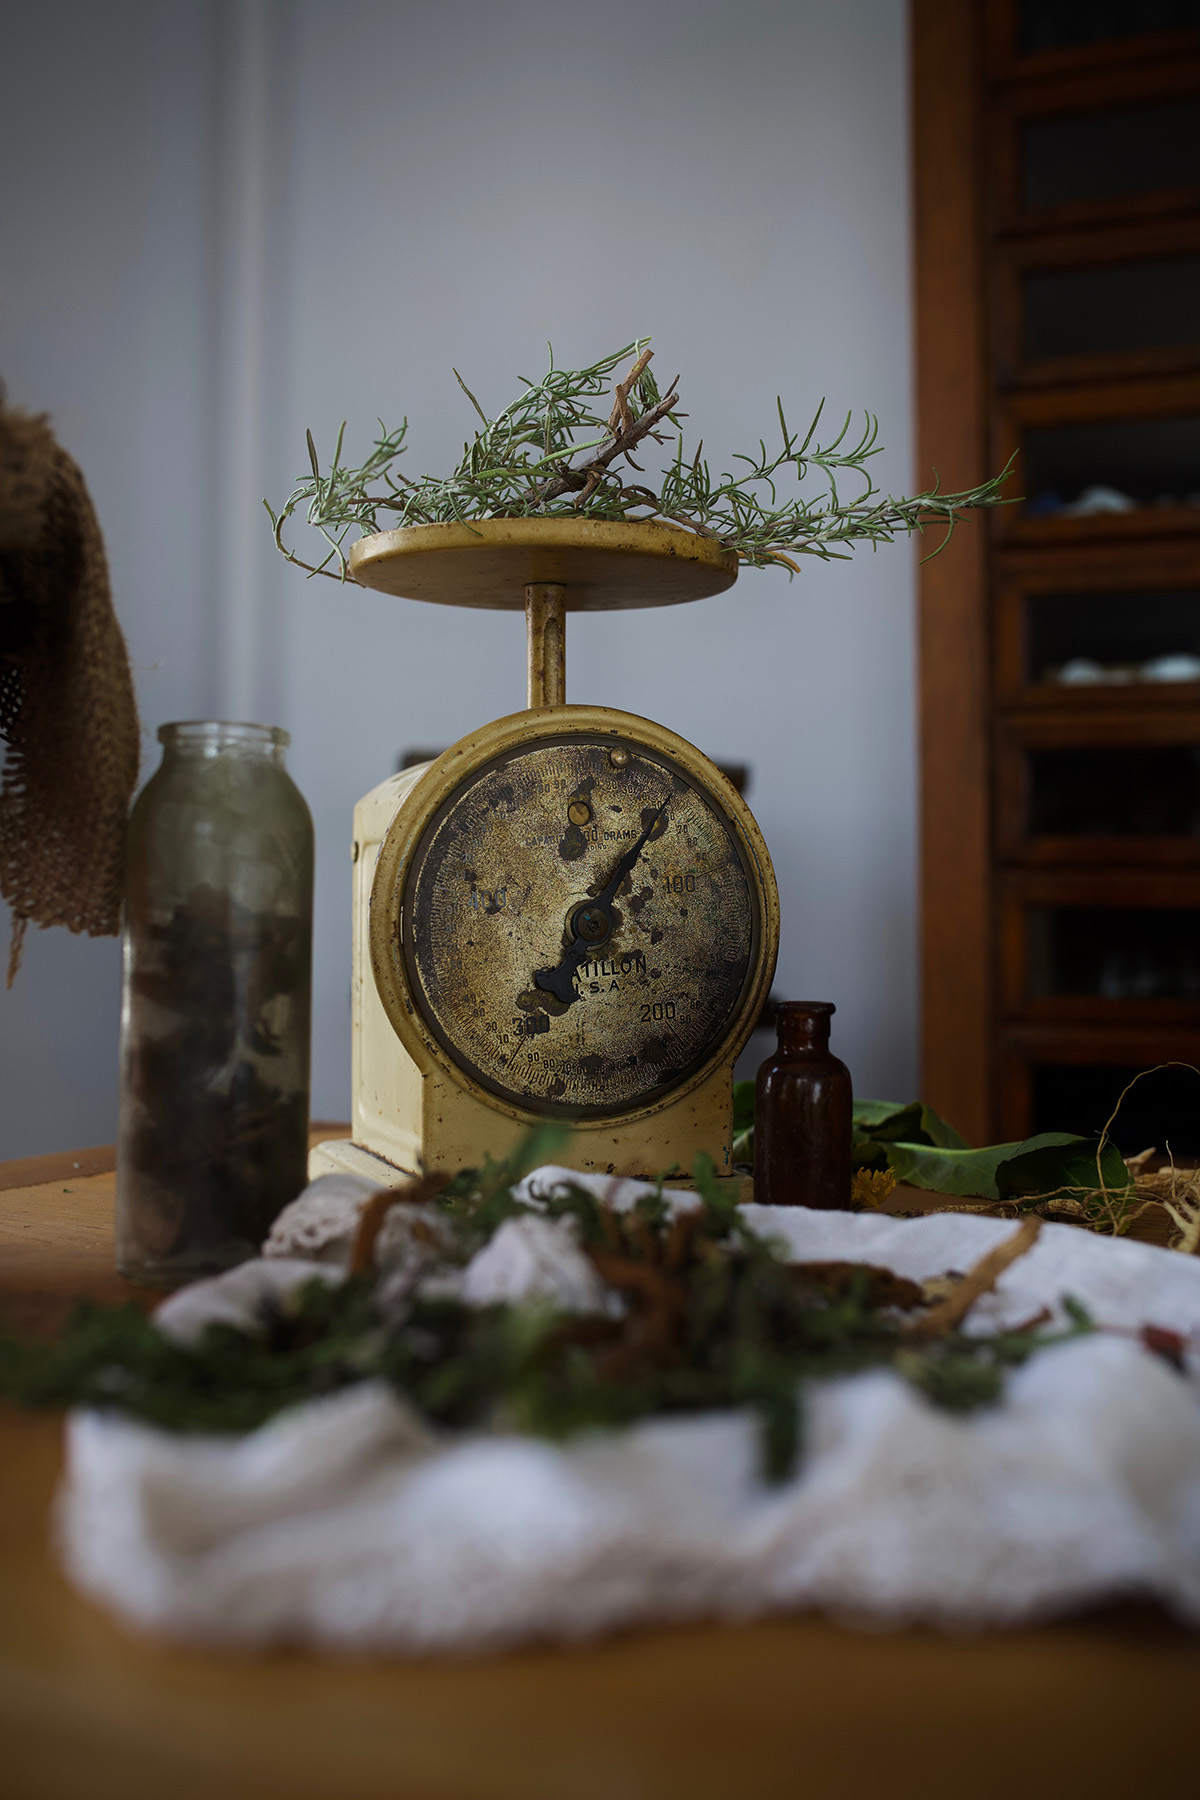 Herbalism: A History - How Herbalists Of The Past Paved The Way For Today | Herbal Academy | Have you ever wondered how modern-day herbalism came to be? Read on to discover how the history of herbalism paved the way for today.